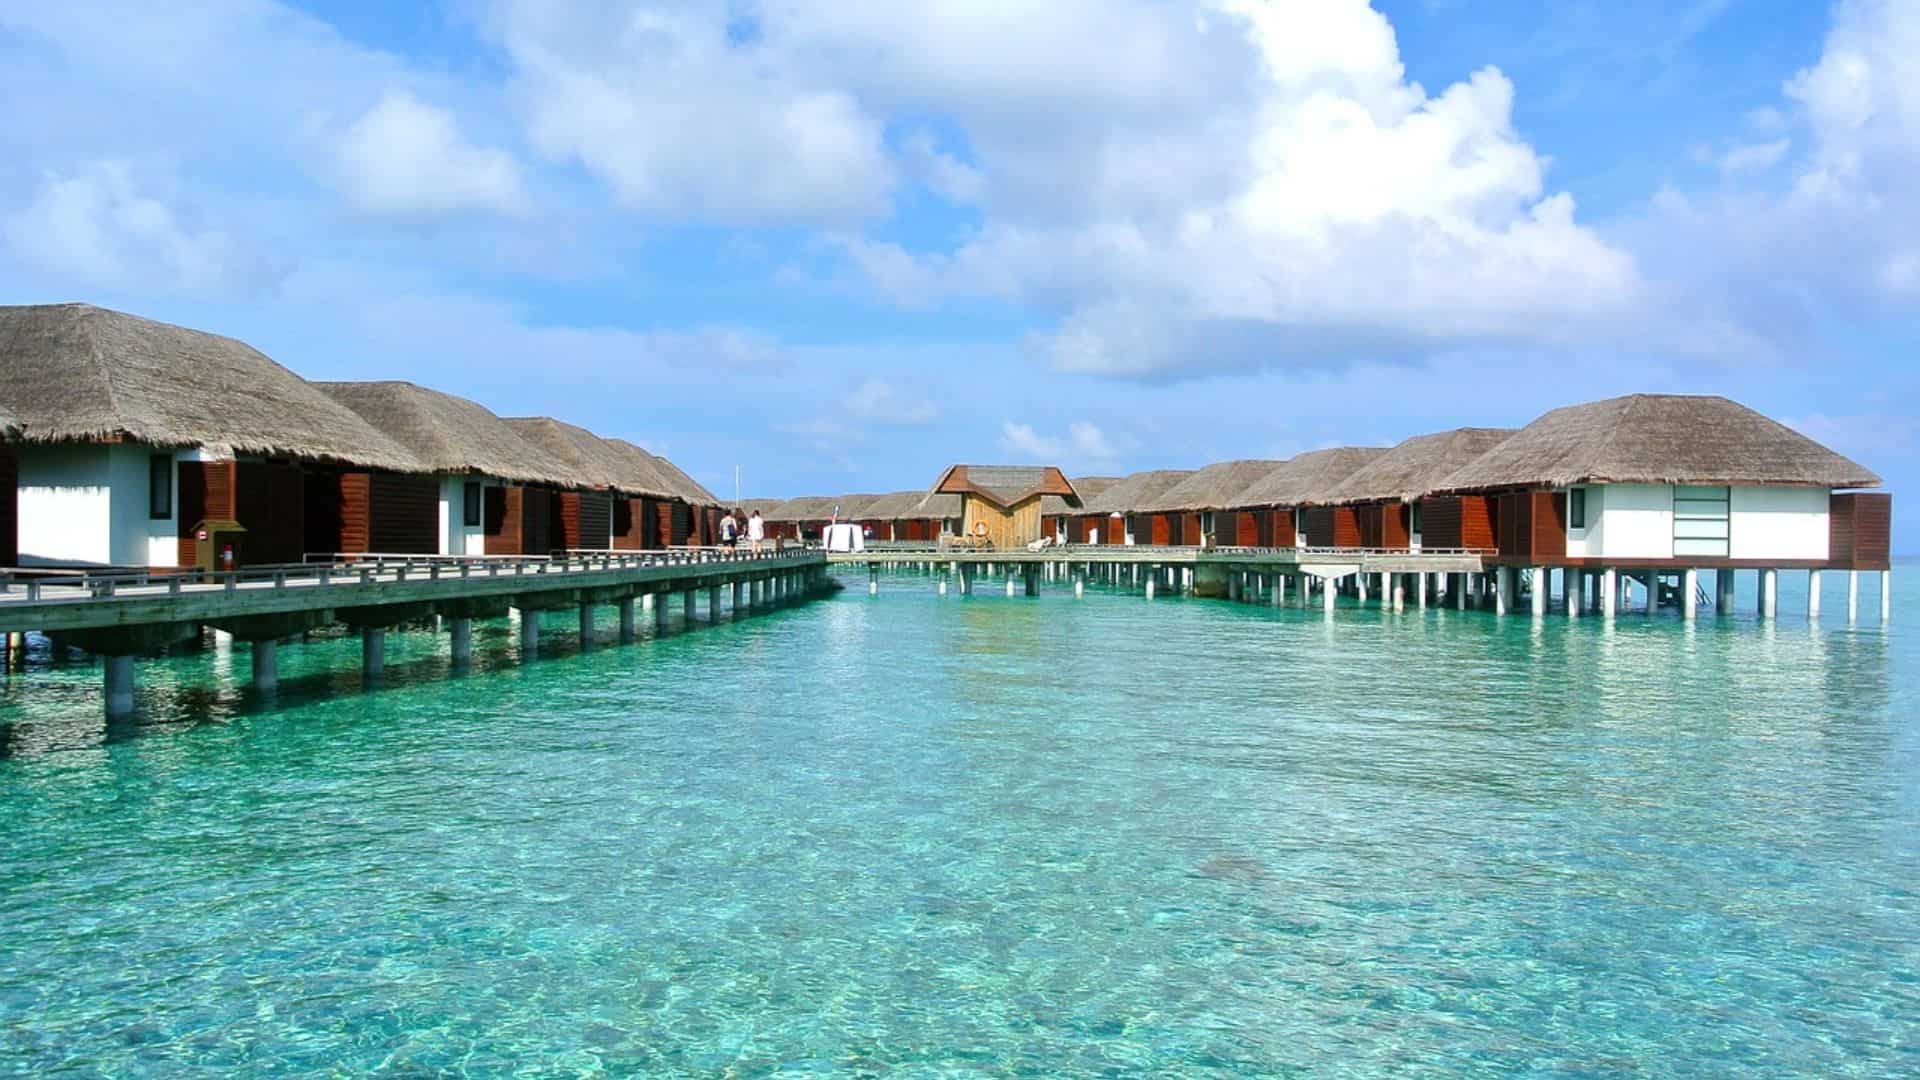 Maldives plans facet motorway exhibits in India to attract tourists abet